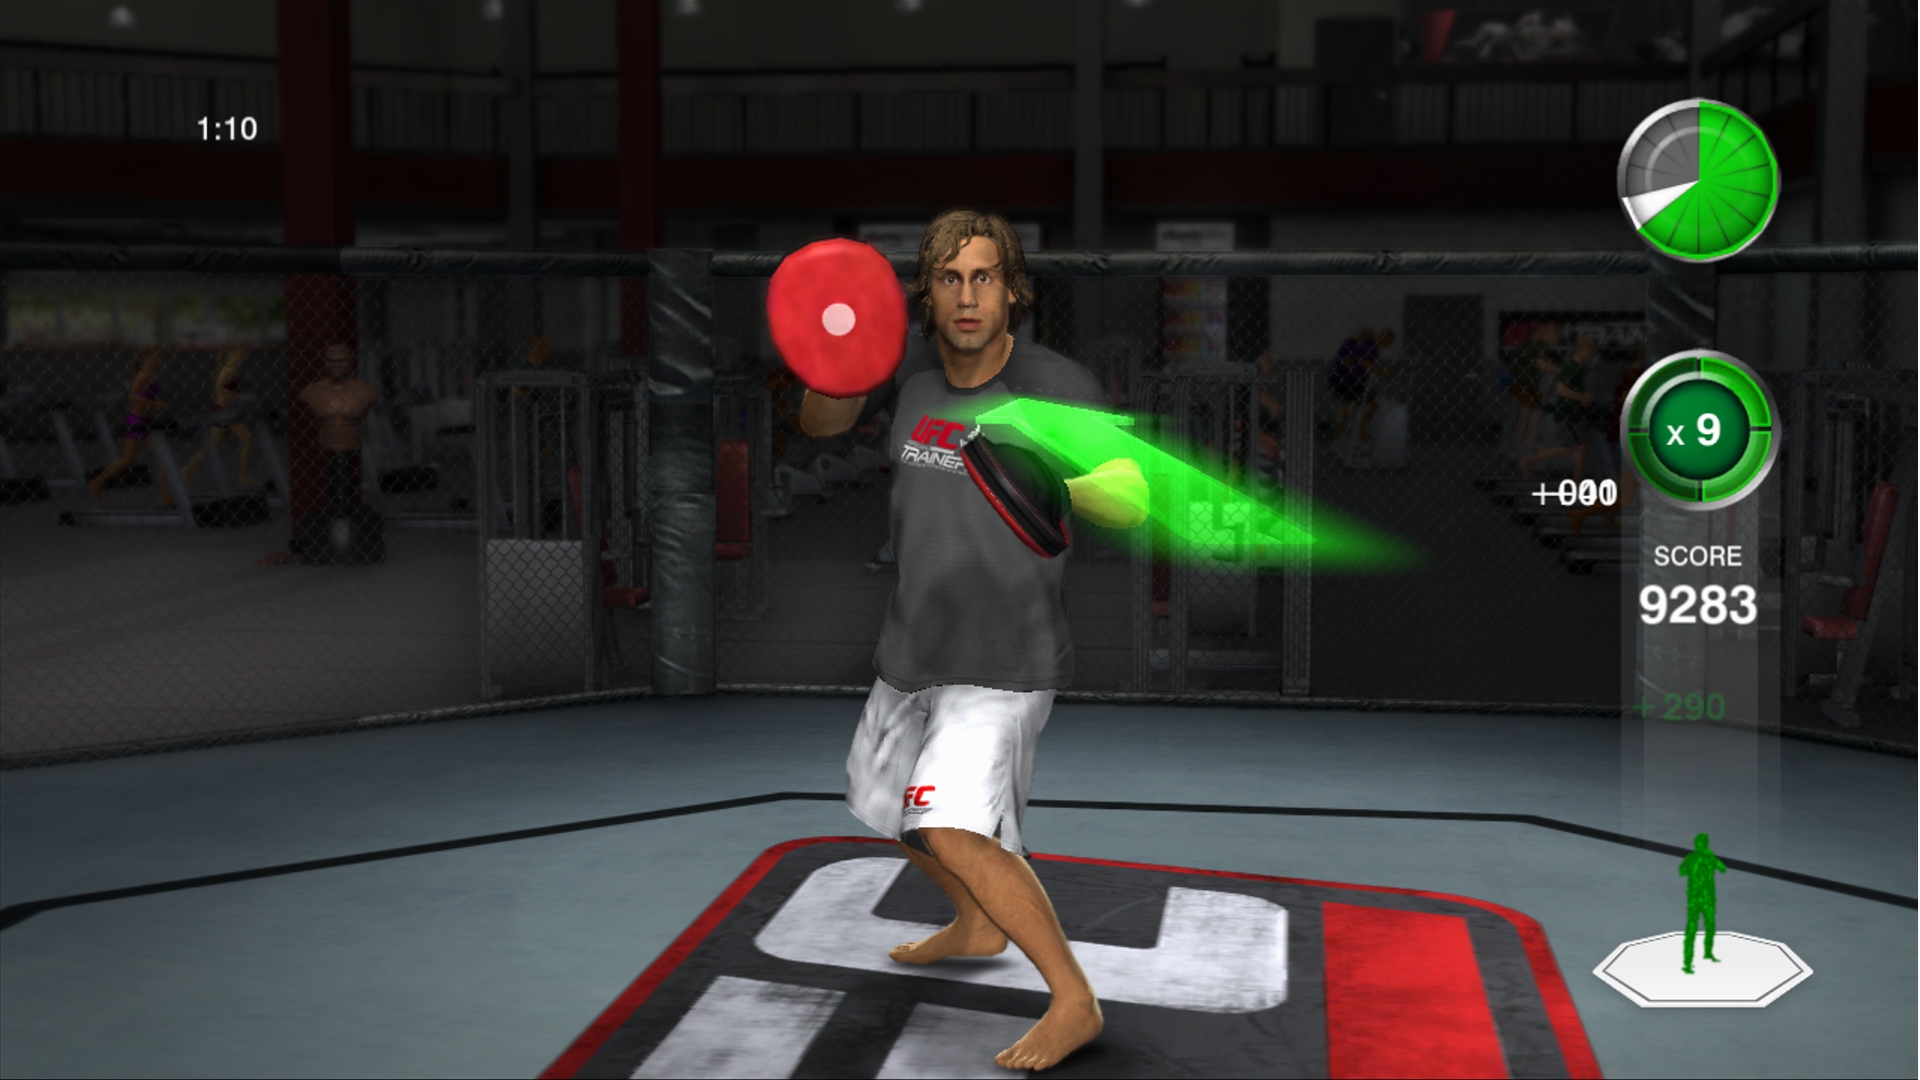 UFC personal Trainer Xbox 360. Kinect UFC Trainer для Xbox 360 Скриншоты. UFC Trainer ps3. UFC personal Trainer: the Ultimate Fitness System ps3. Игра про тренера